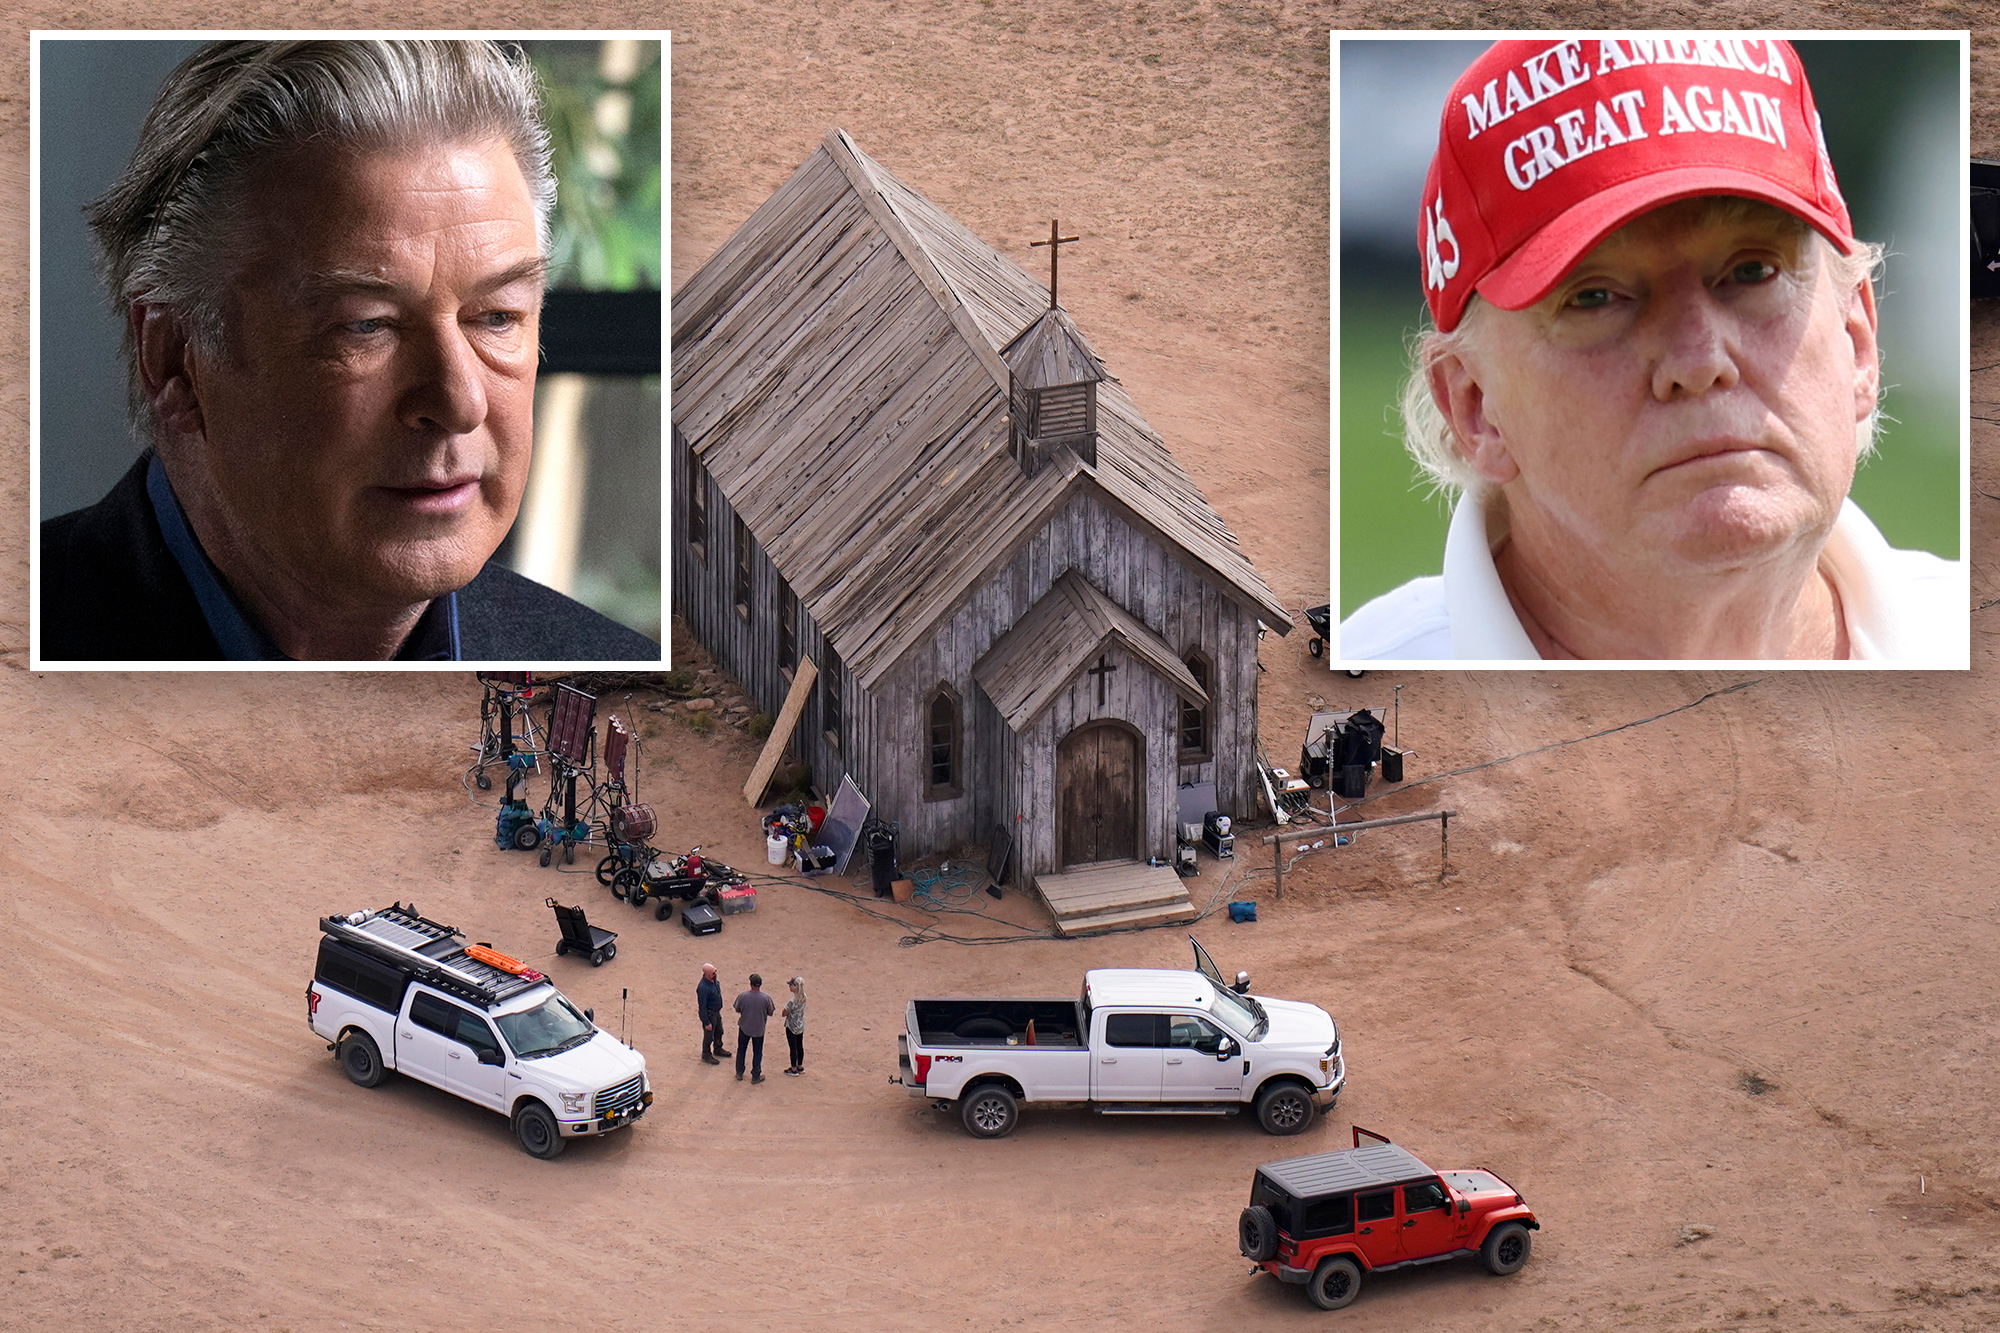 Alec Baldwin implies that Donald Trump physically endangered him following the fatal shooting while filming 'Rust.'